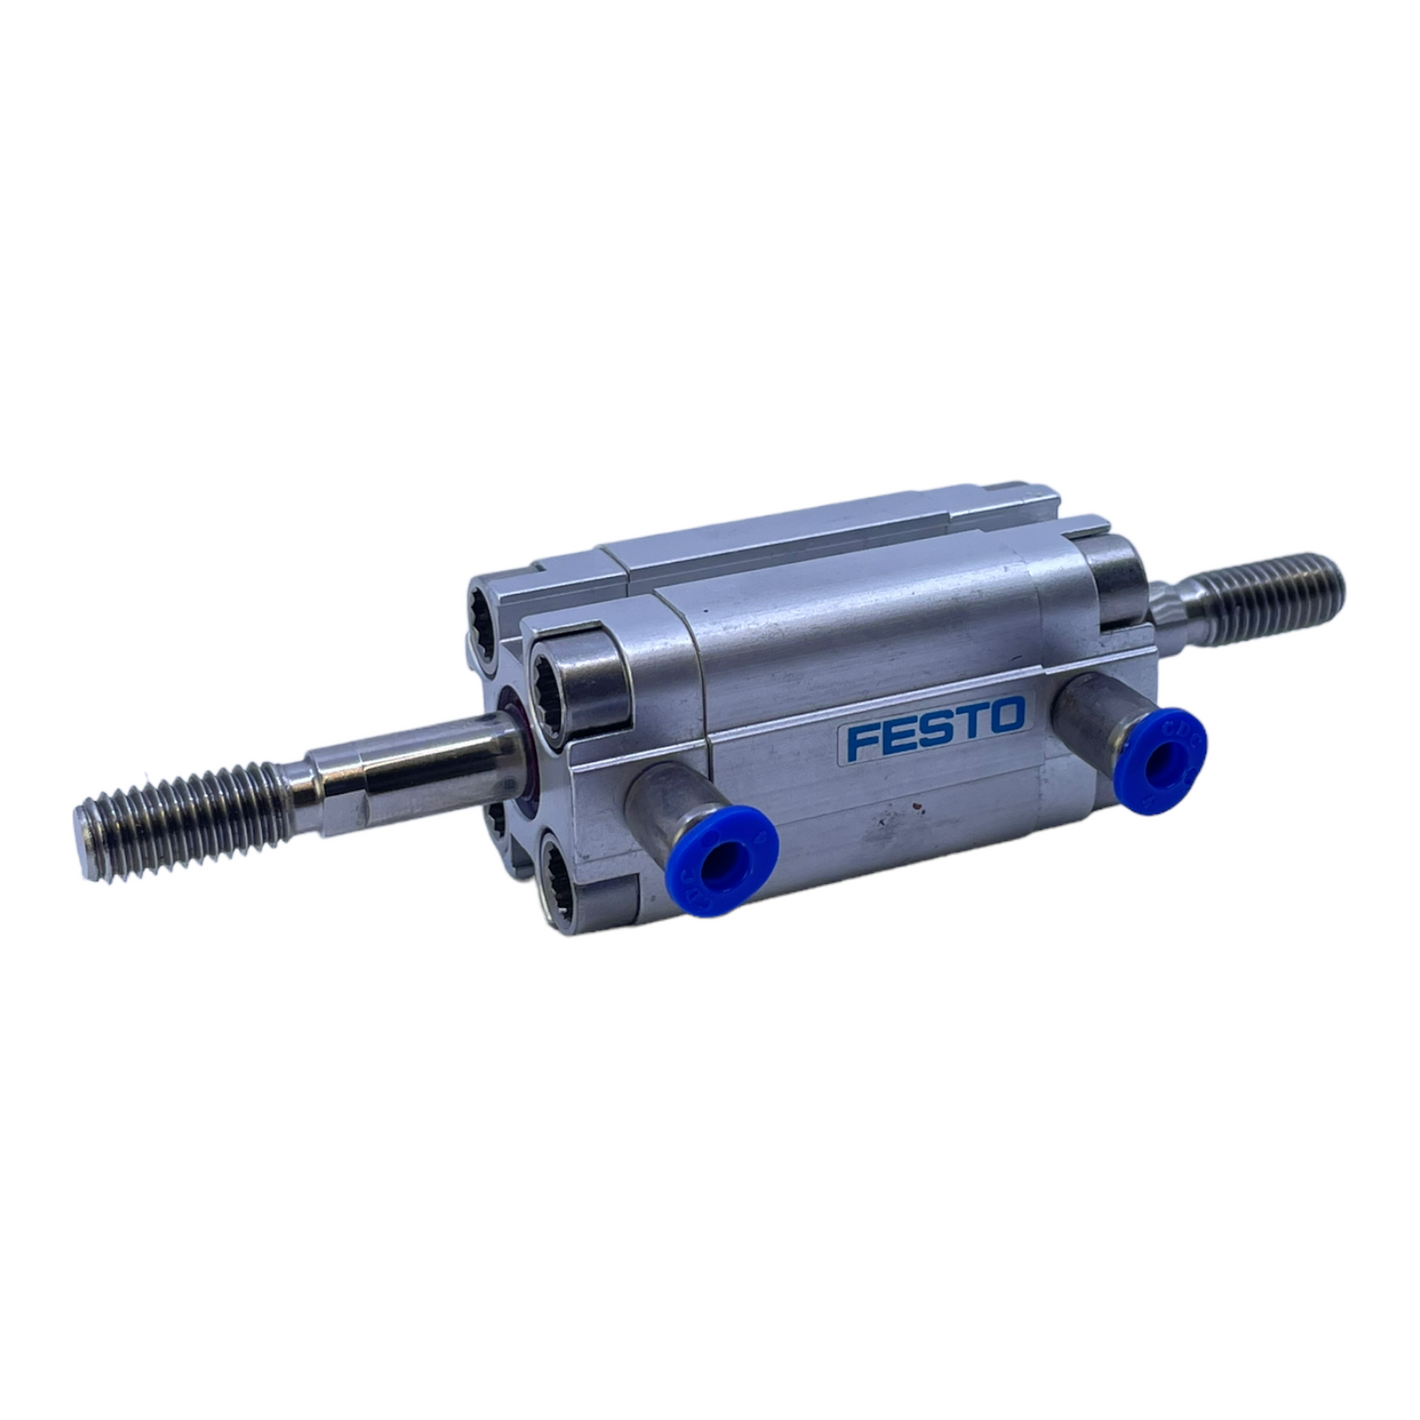 Festo ADVU-16-20-APA-S2 compact cylinder 156051 for industrial use